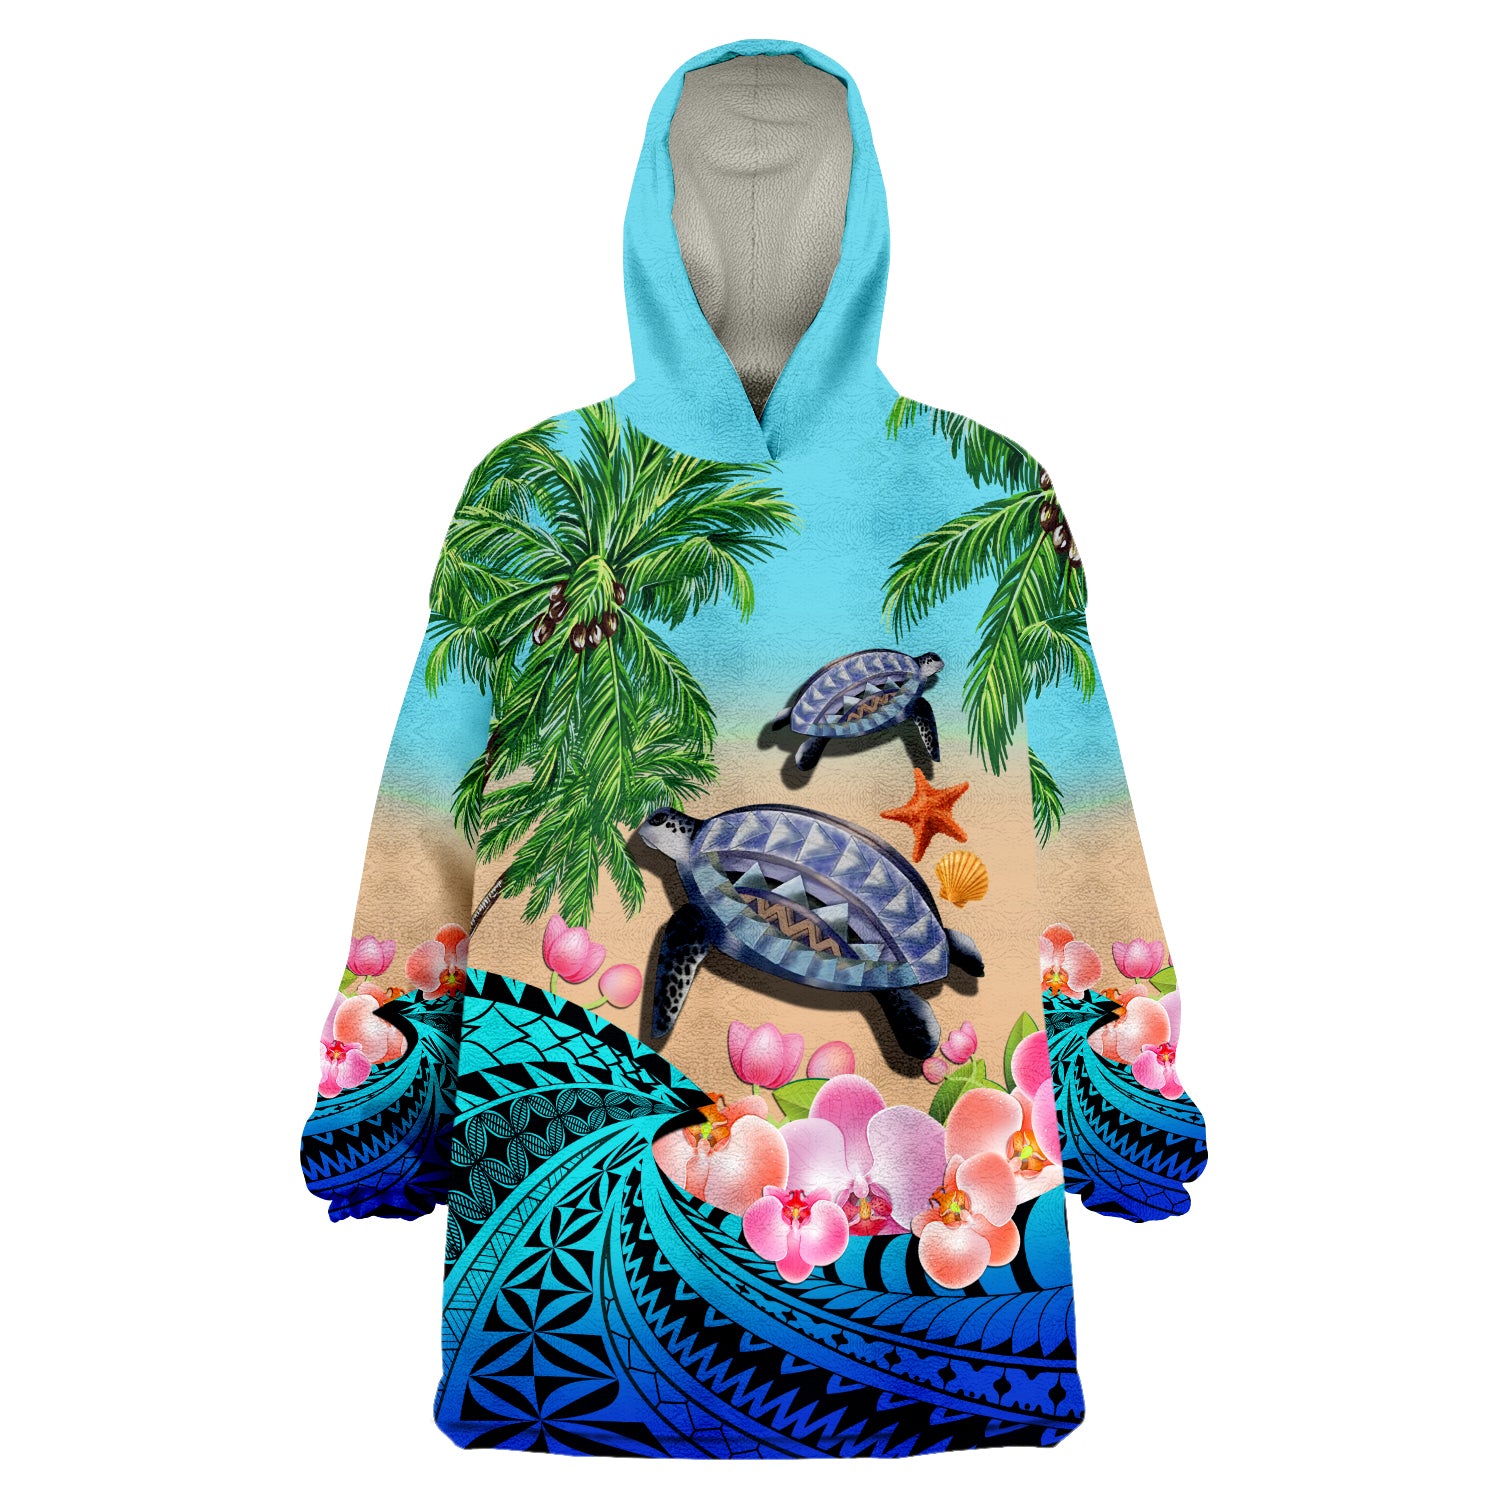 (Custom Personalised) Polynesian Turtle Coconut Tree And Orchids Wearable Blanket Hoodie LT14 Unisex One Size - Polynesian Pride